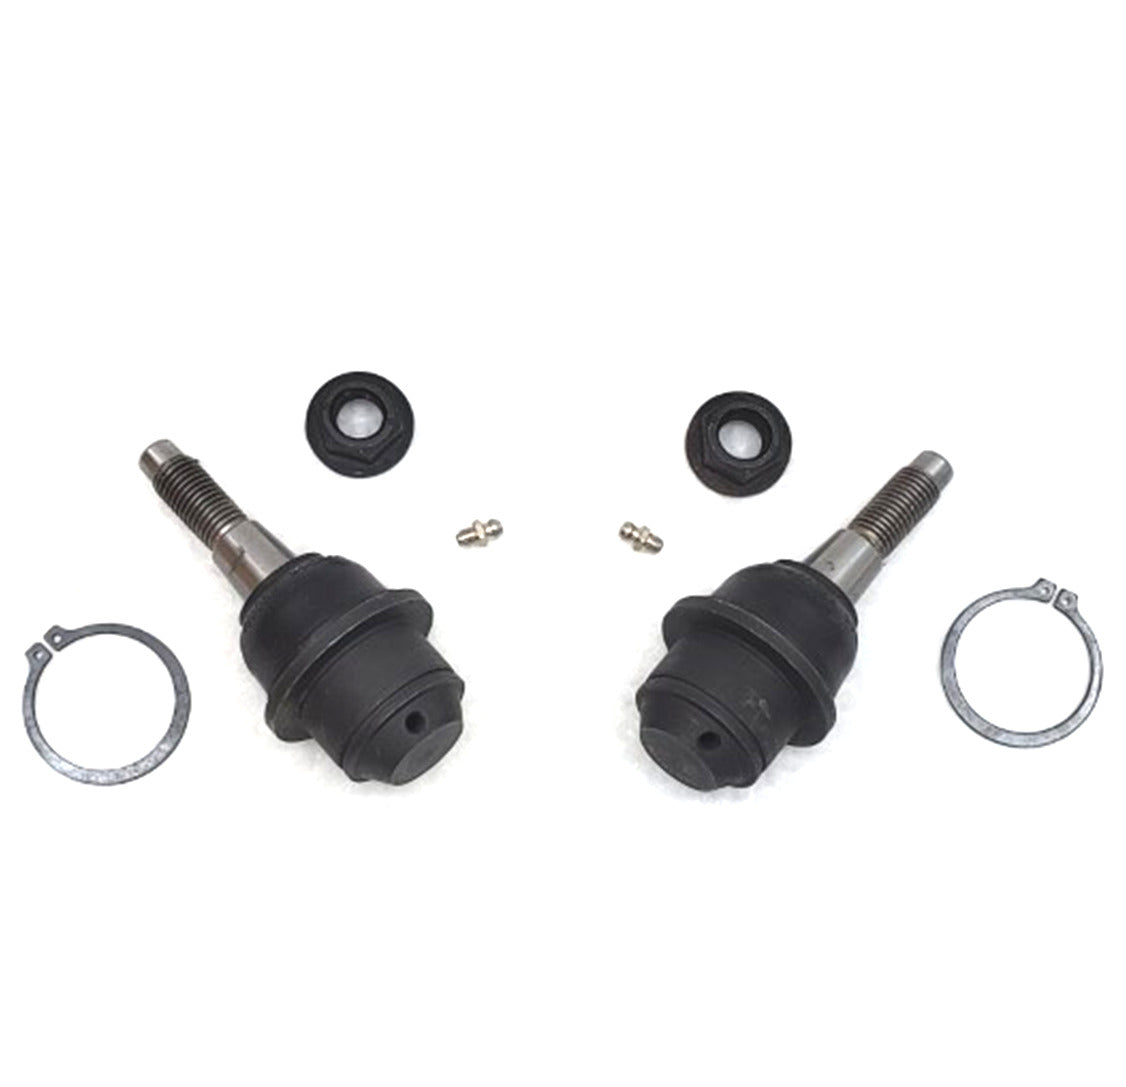 XRF Lower Ball Joints Suspension Kit for 2007-2013 Cadillac, Chevrolet, GMC, 2WD, 4x4